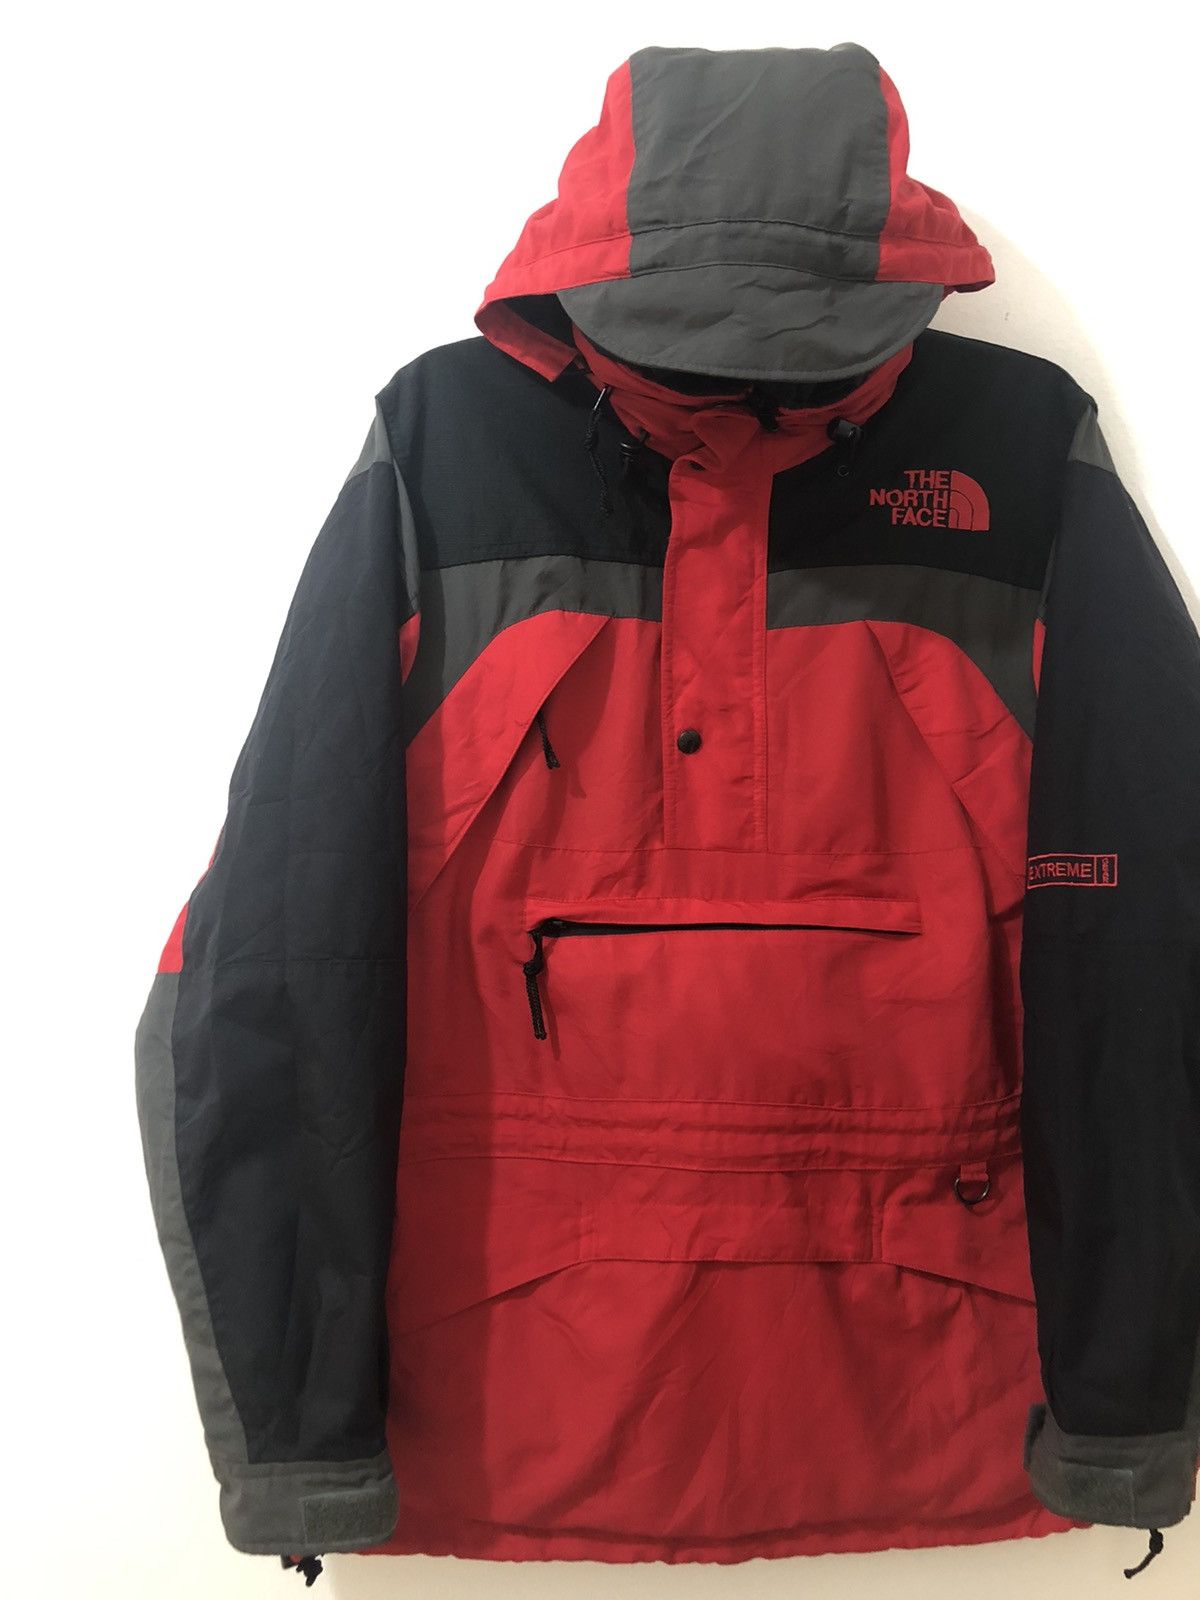 Rare 90s North Face Extreme Gear Pullover Jacket - 7